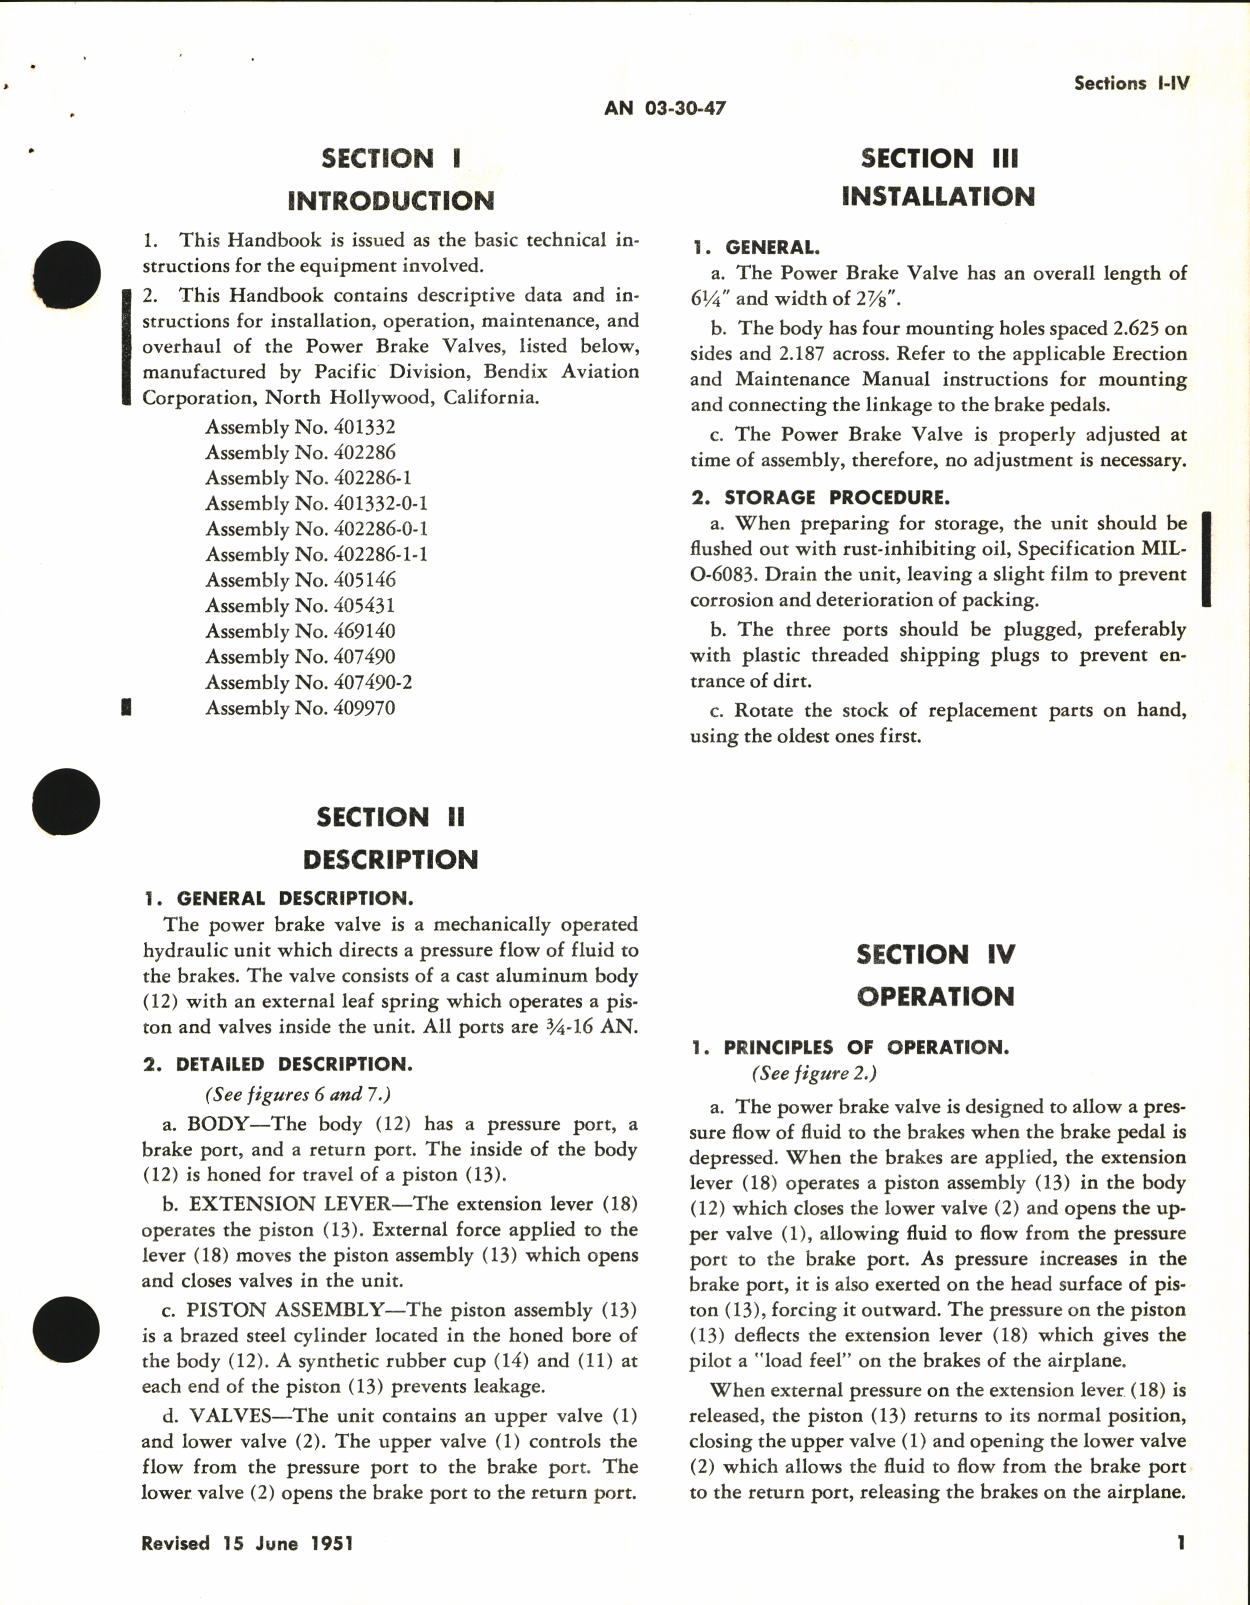 Sample page 5 from AirCorps Library document: Operation, Service & Overhaul Instructions with Parts Catalog for Power Brake Valves